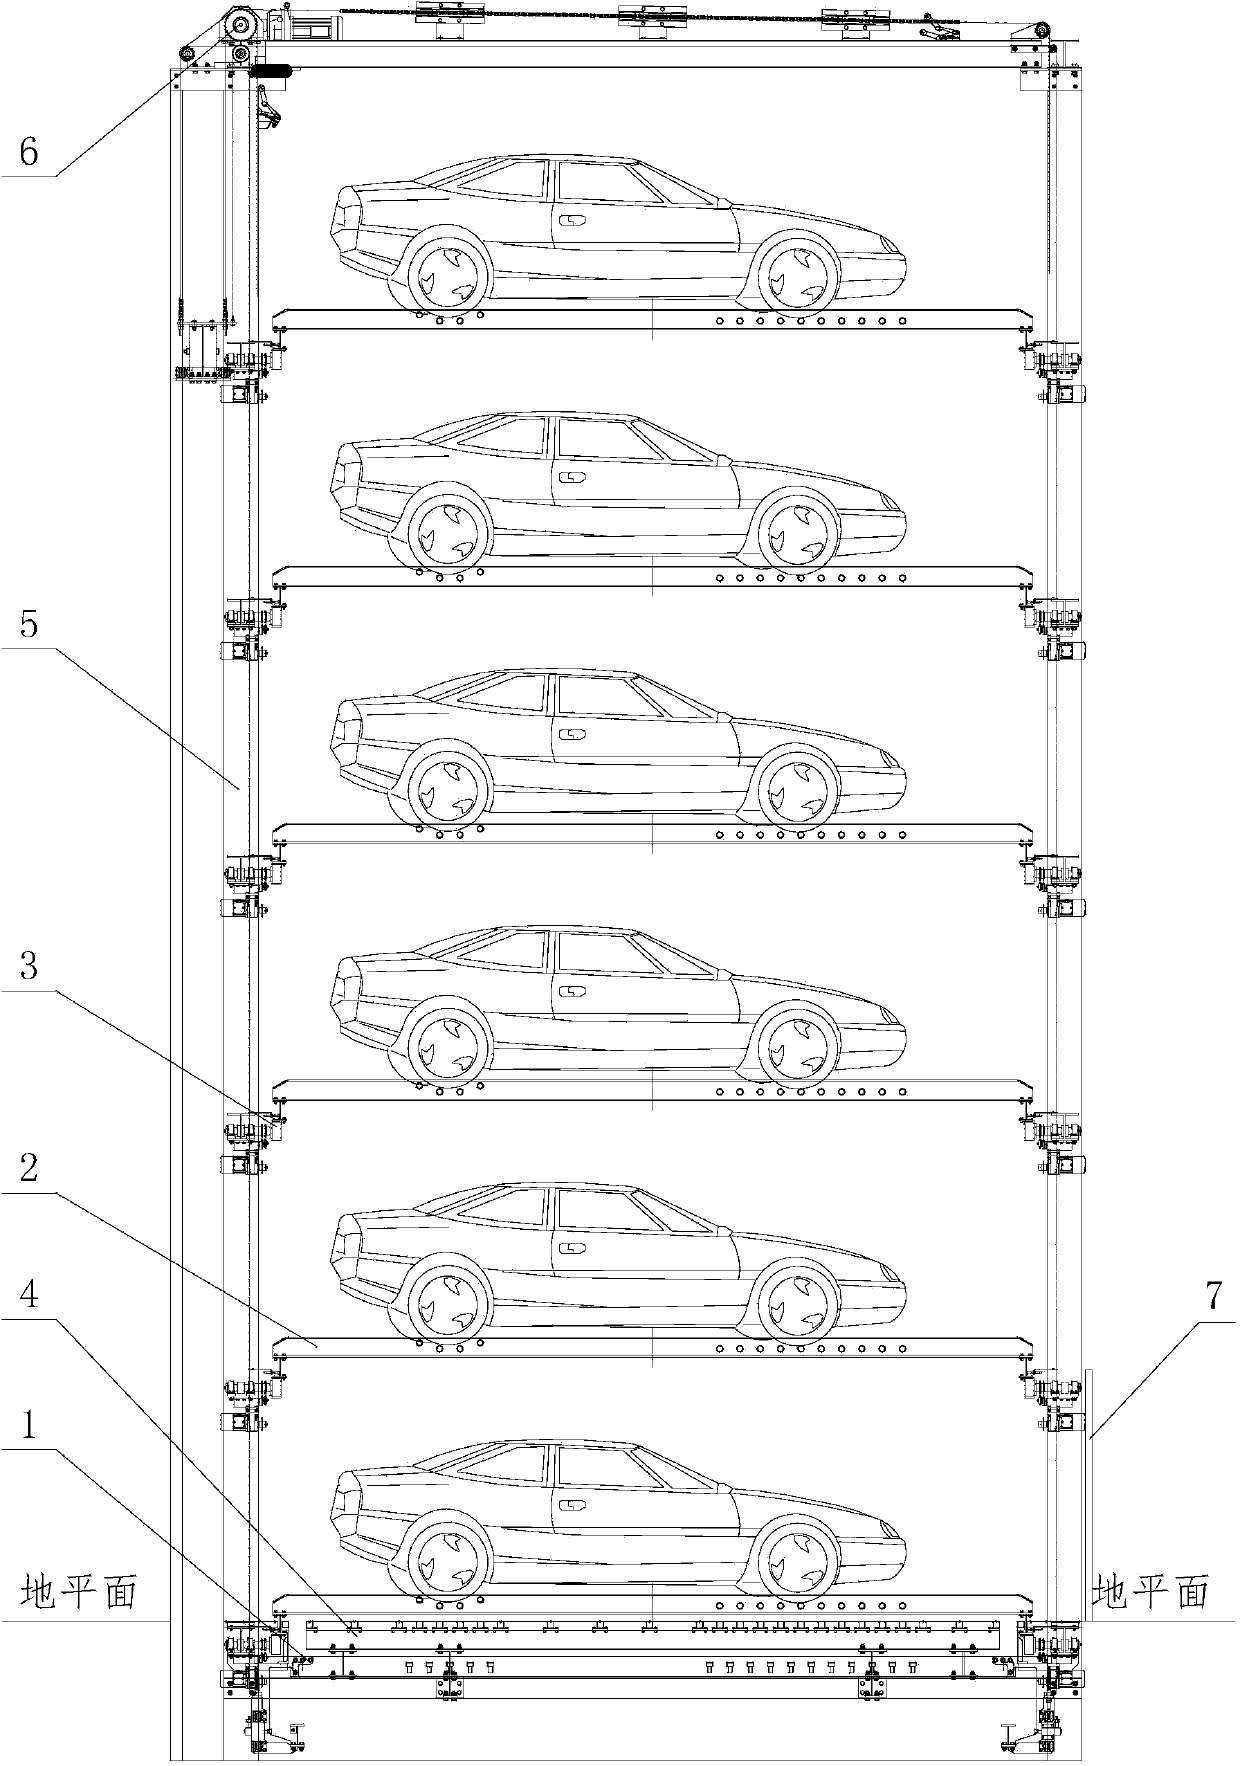 Multilayer vertical lift comb-tooth type solid parking equipment and vehicle storing and taking method